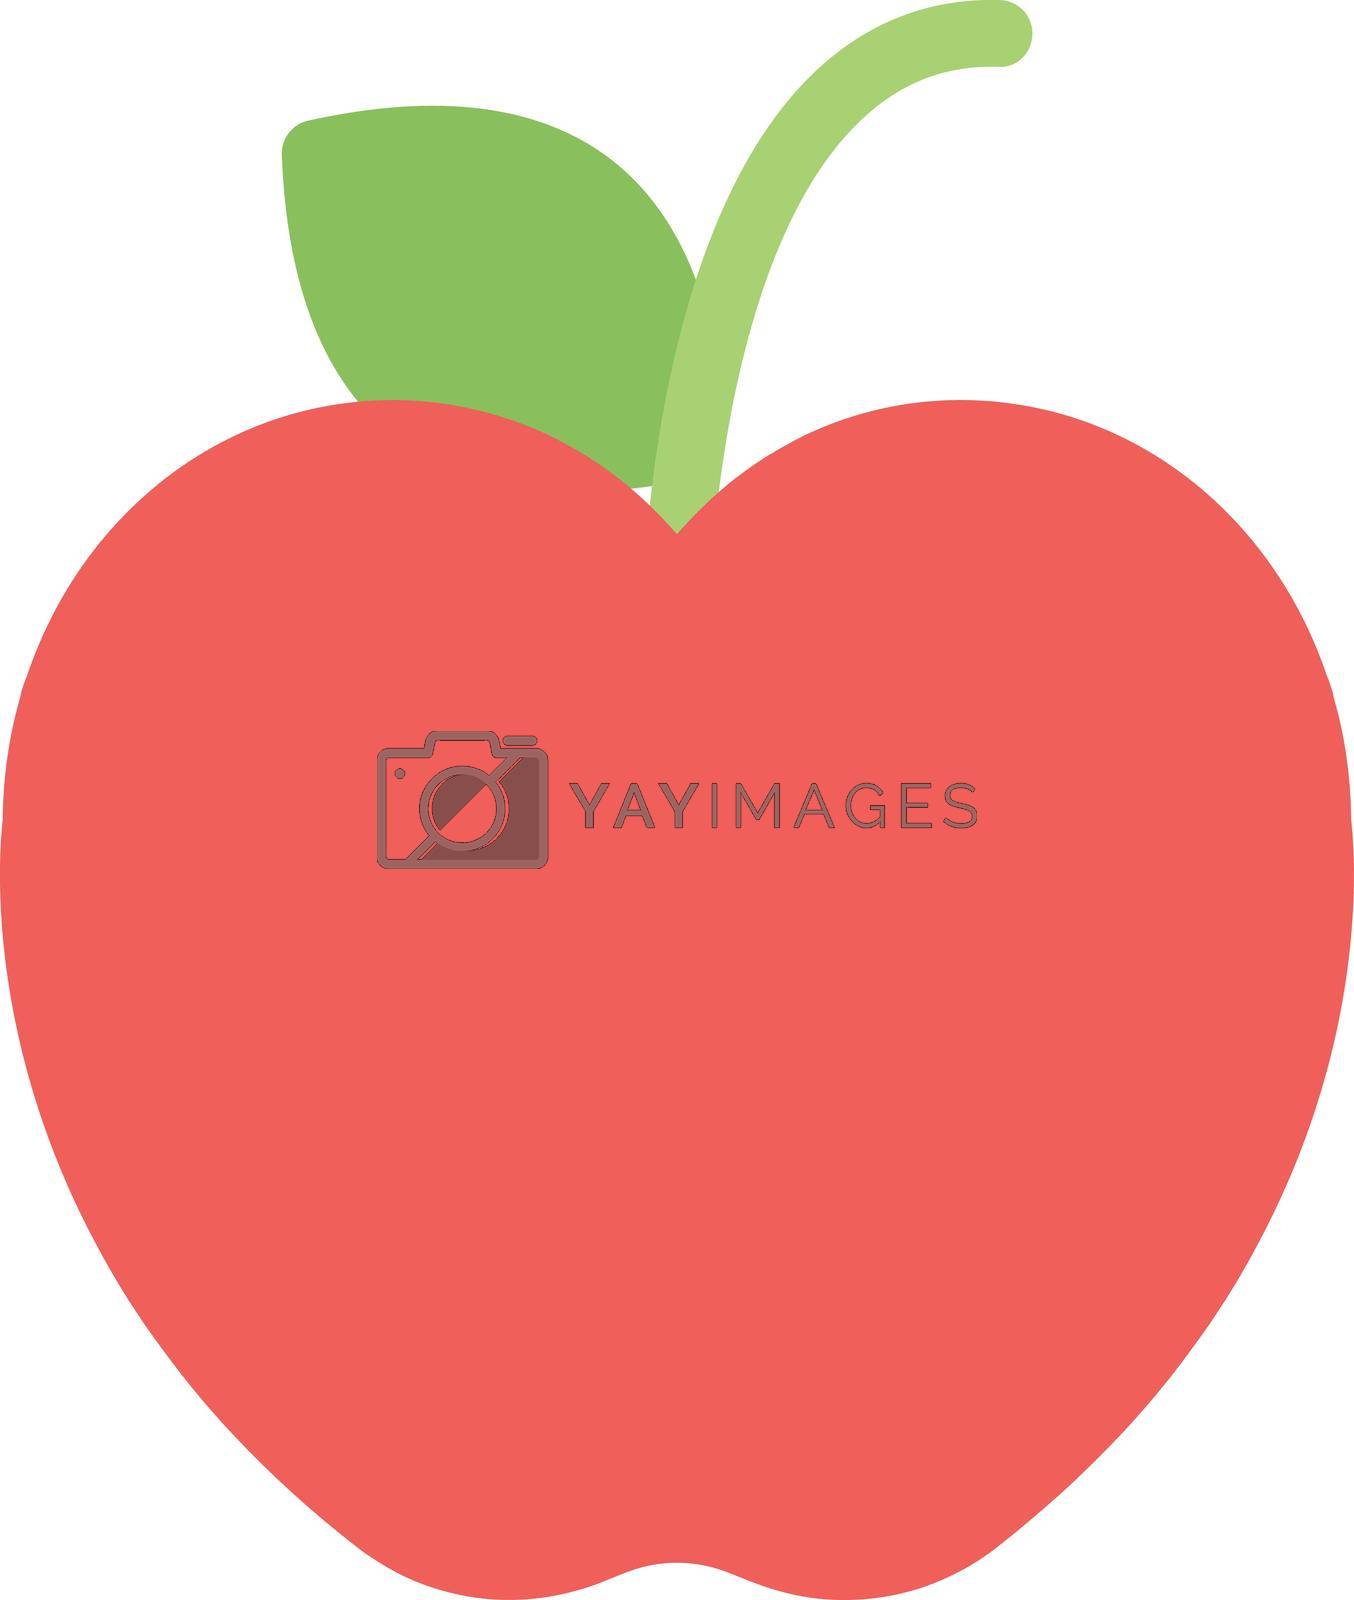 Royalty free image of apple by FlaticonsDesign